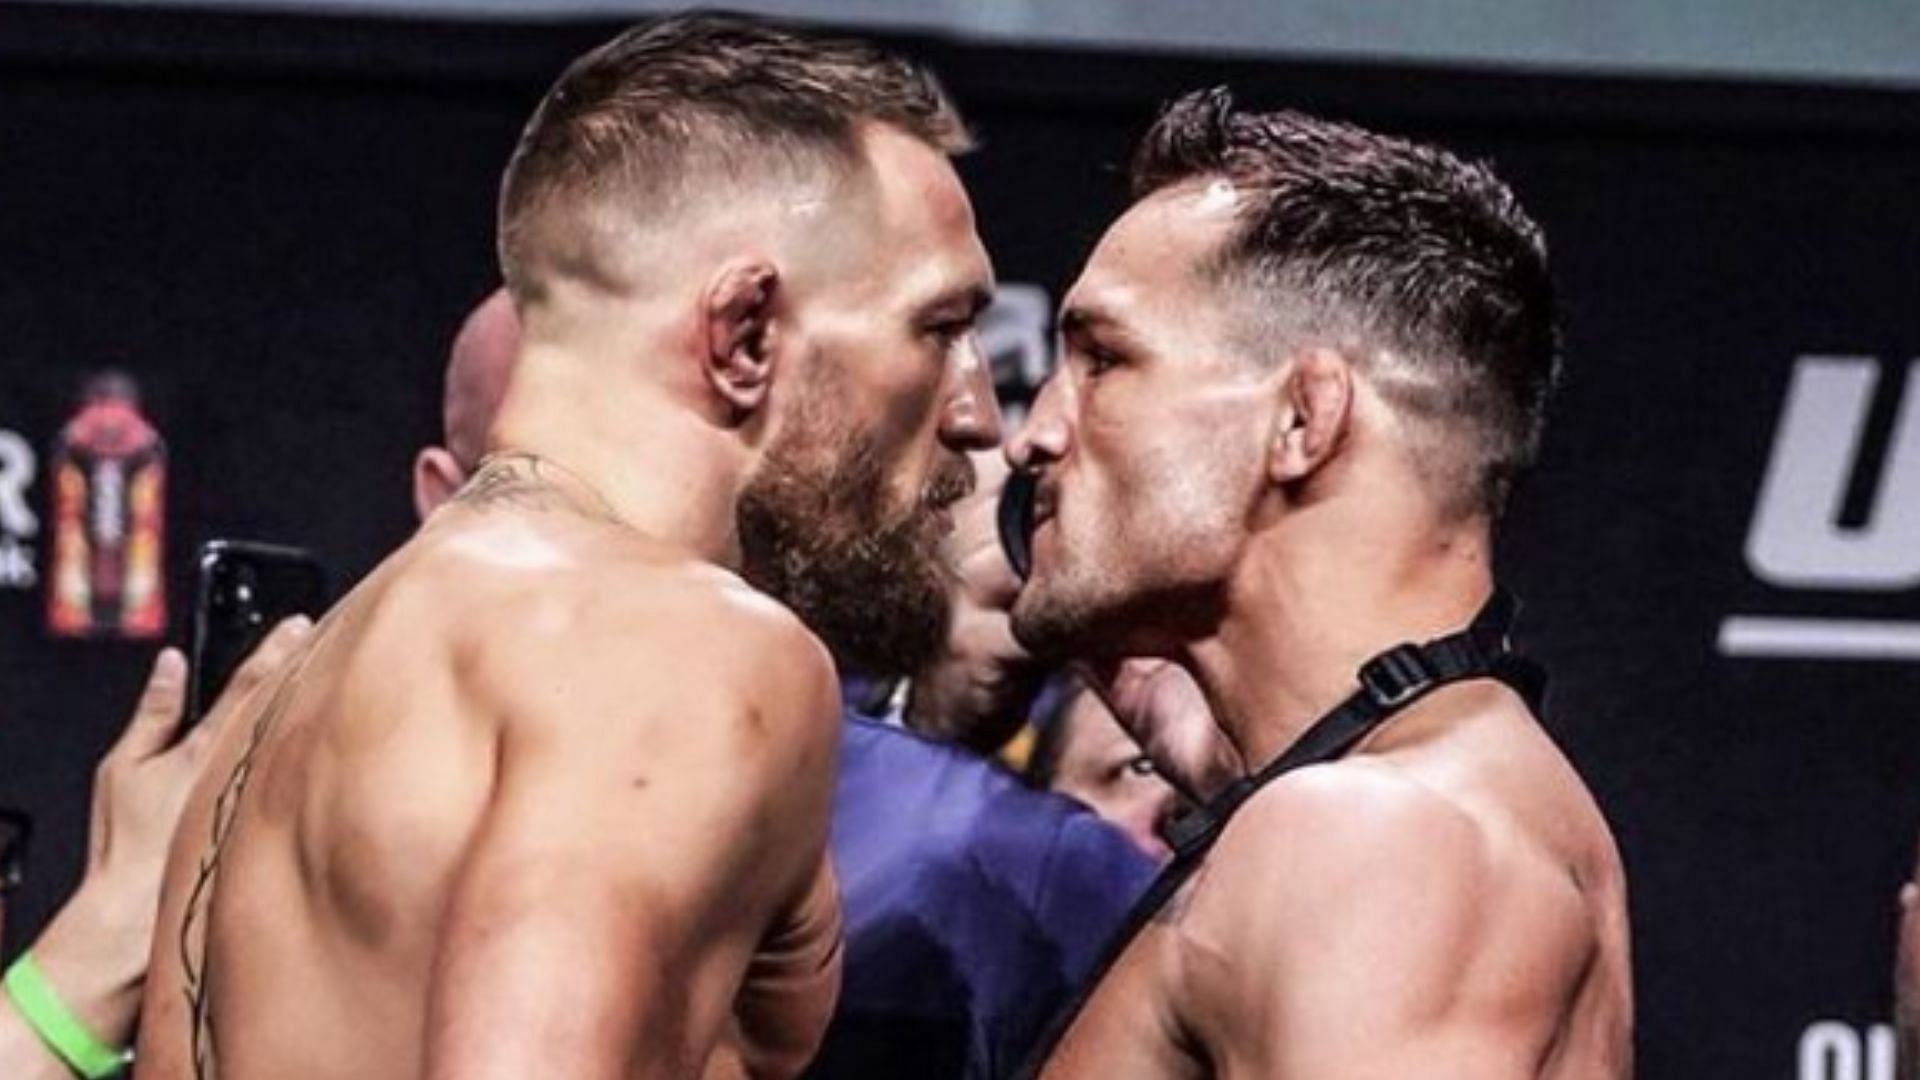 Conor McGregor (left) names new opponent for Michael Chandler (right) [Image courtesy of @mikechandlermma on Instagram]